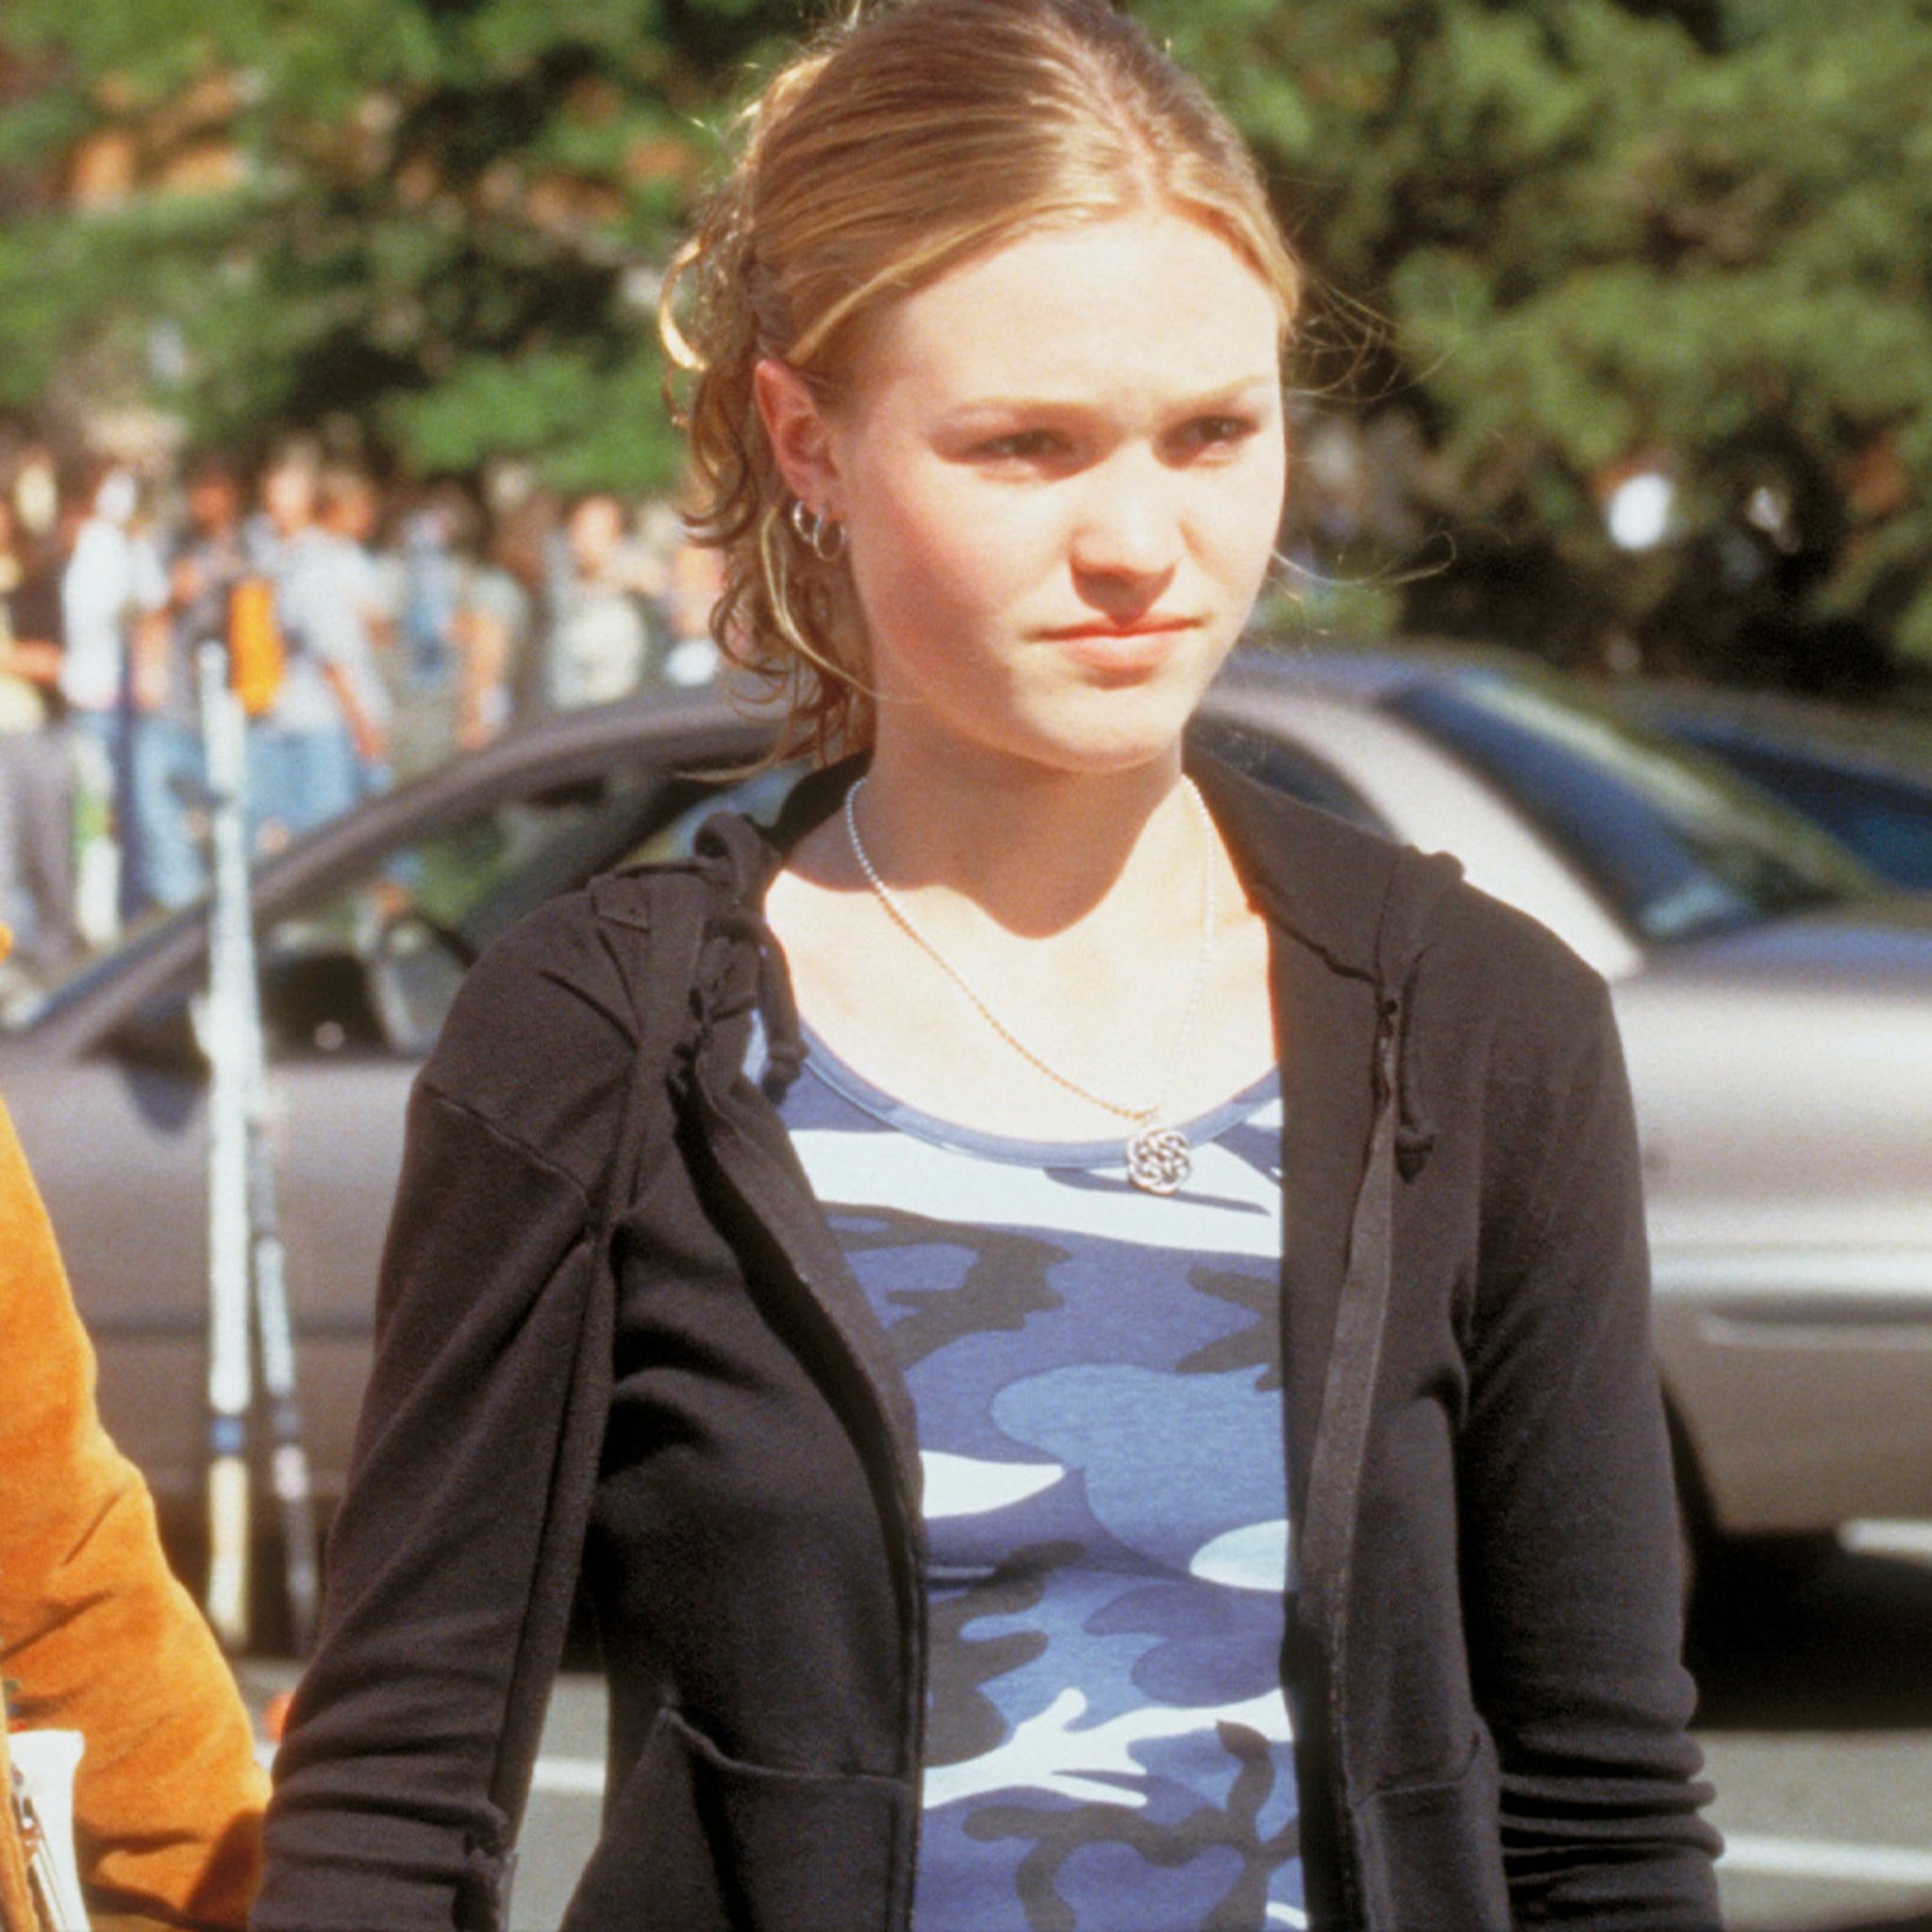 Who Would Star In '10 Things I Hate About You' If It Was Made Today?